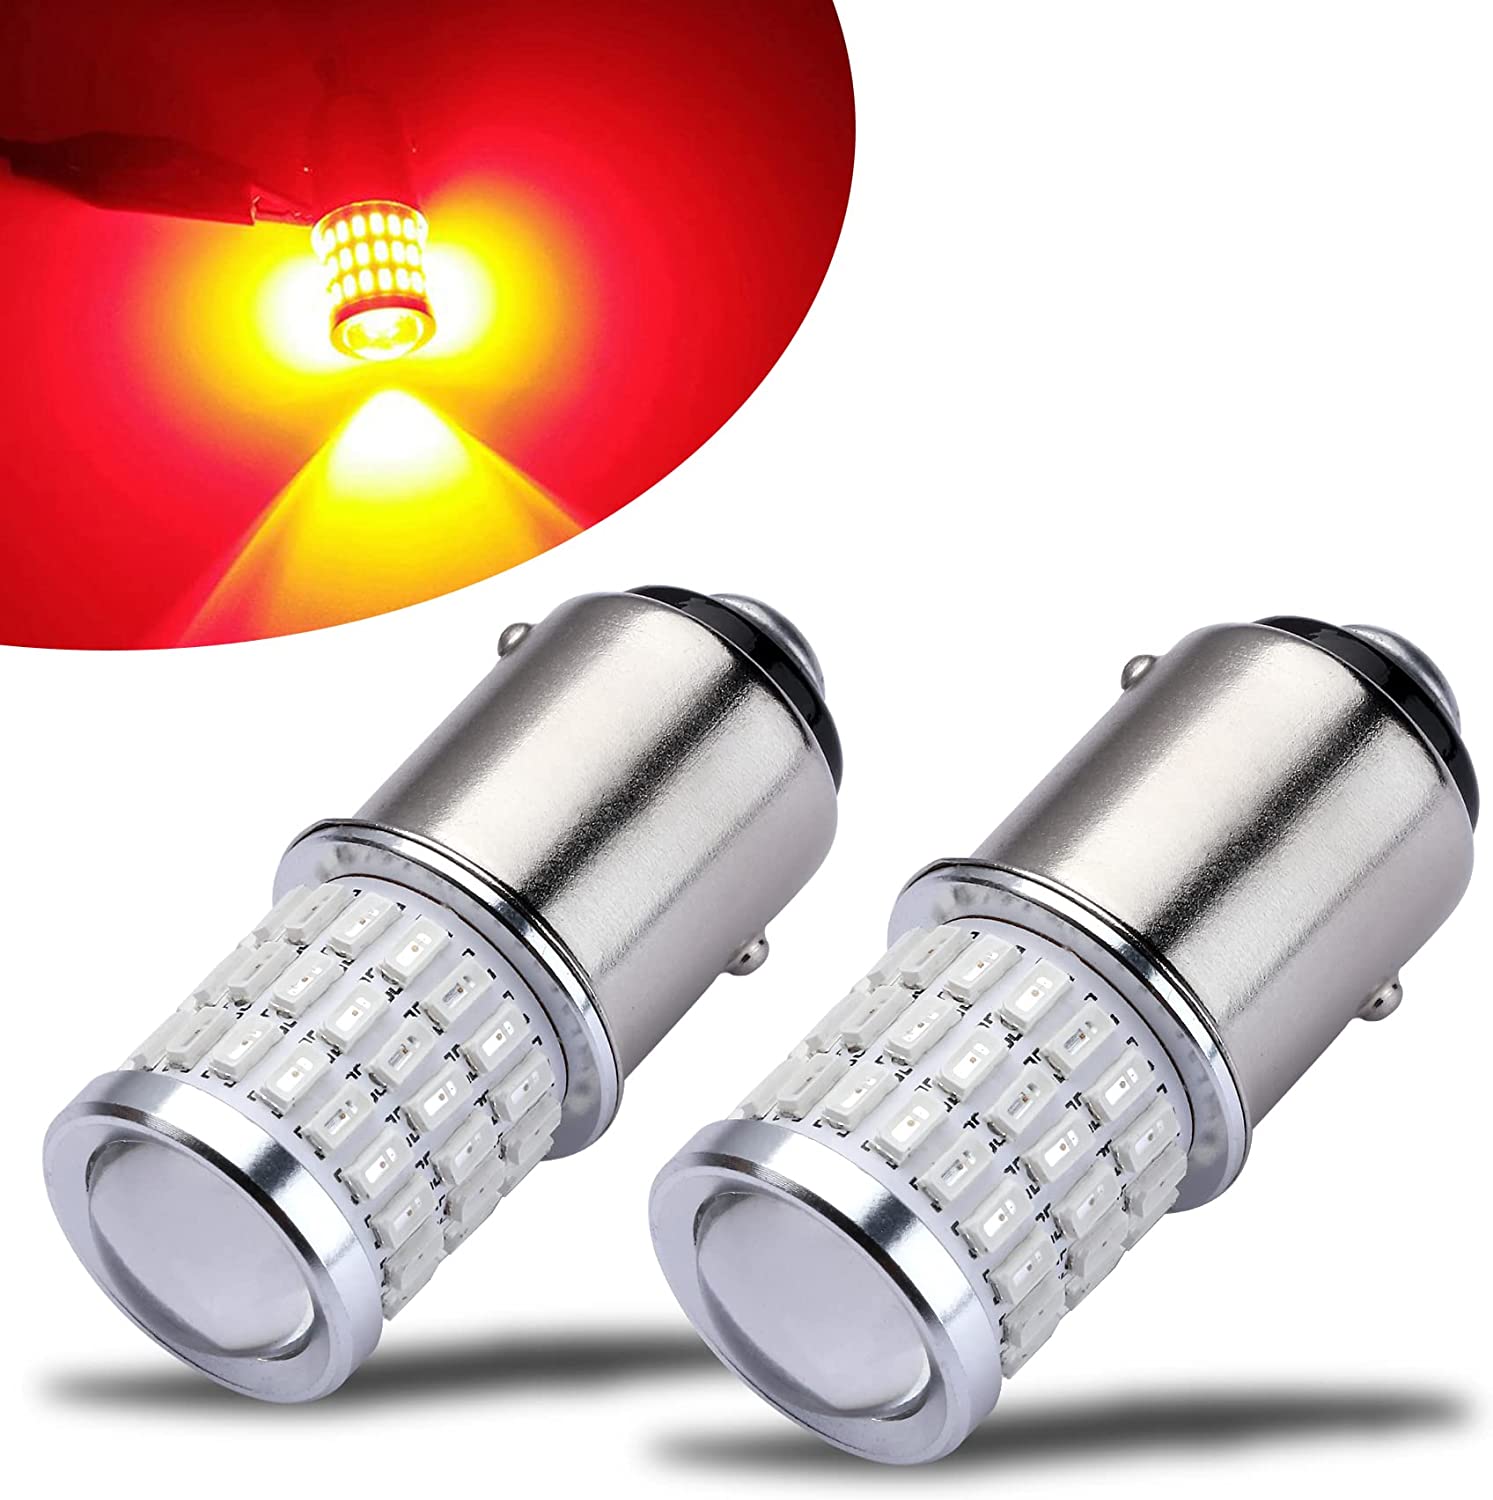 The Best & Brightest 1157 LED Tail Light Bulbs